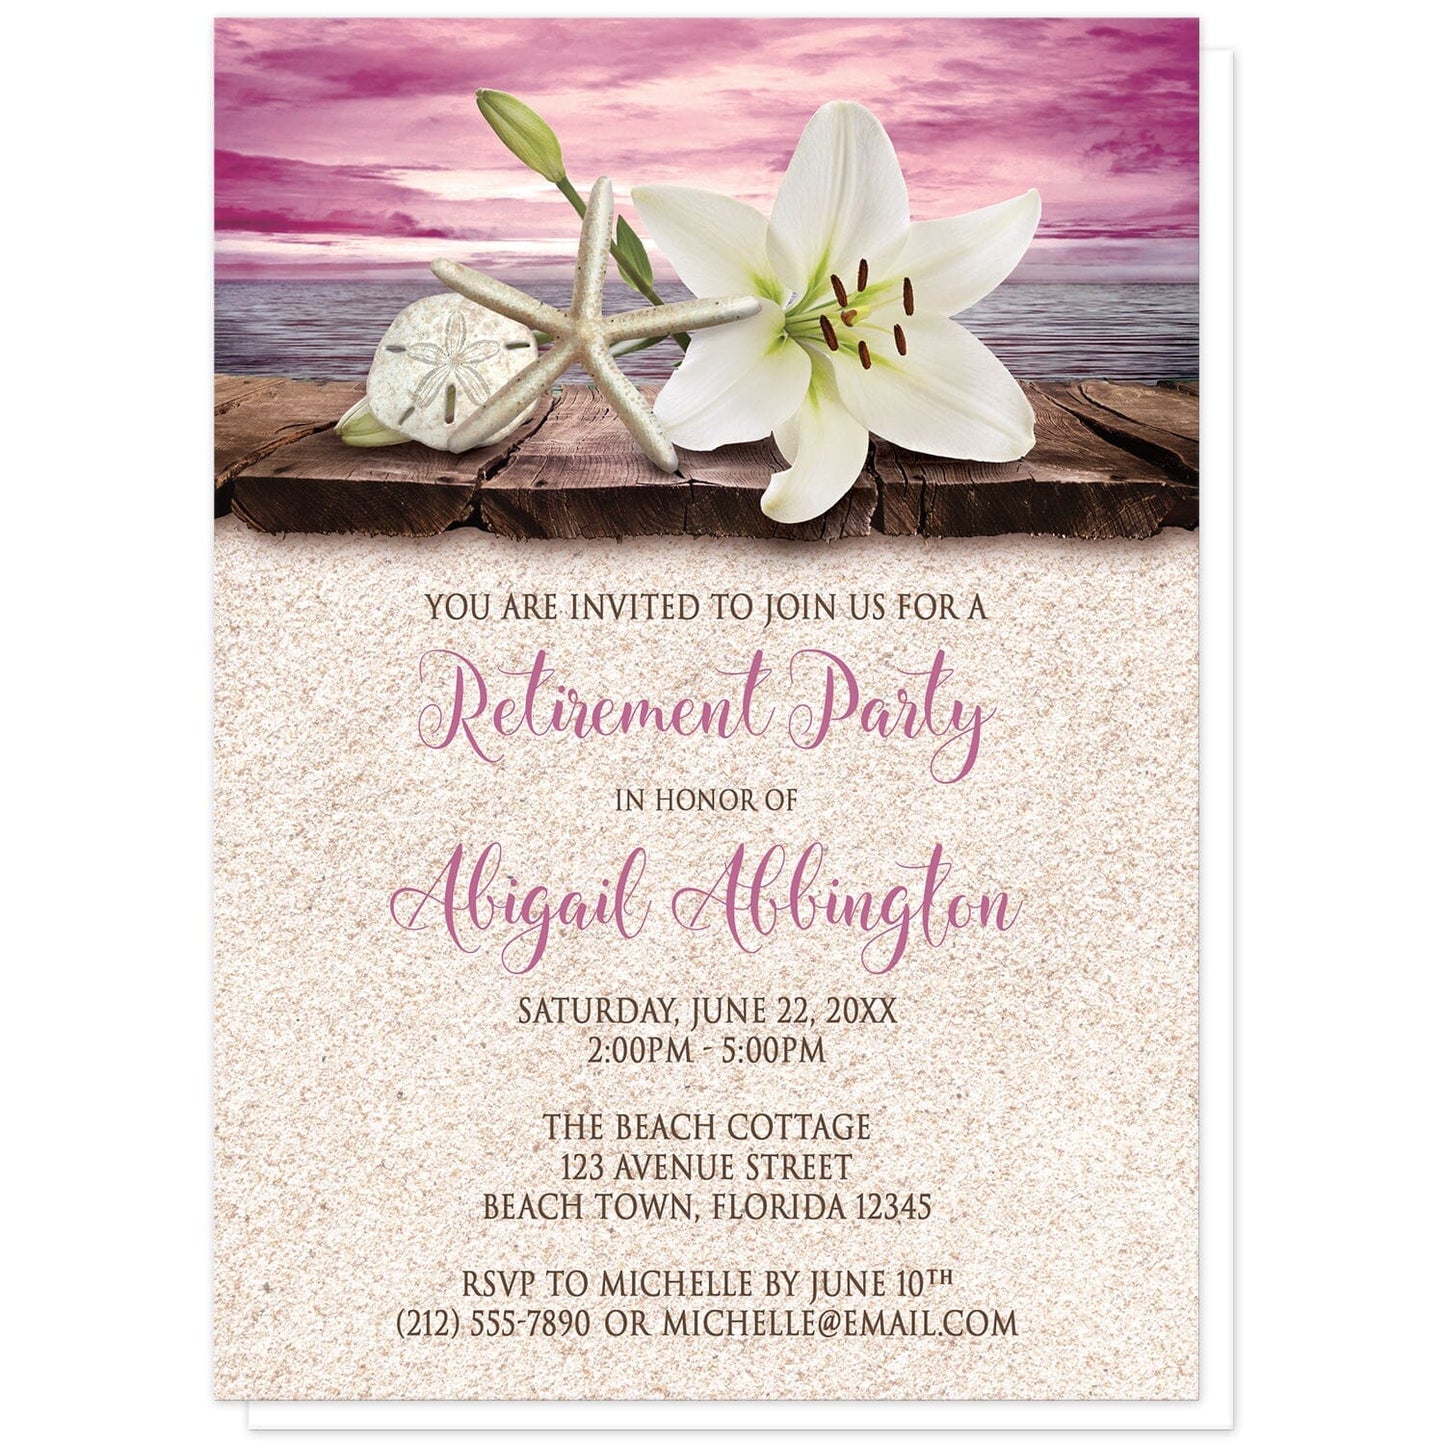 Lily Seashells and Sand Magenta Beach Retirement Invitations at Artistically Invited. Tropical lily seashells and sand magenta beach retirement invitations with an elegant white lily, a starfish, and a sand dollar on a rustic wood dock overlooking the open water under a magenta sunset sky. Your personalized retirement party details are custom printed in dark brown and magenta over a beige sand background design. 